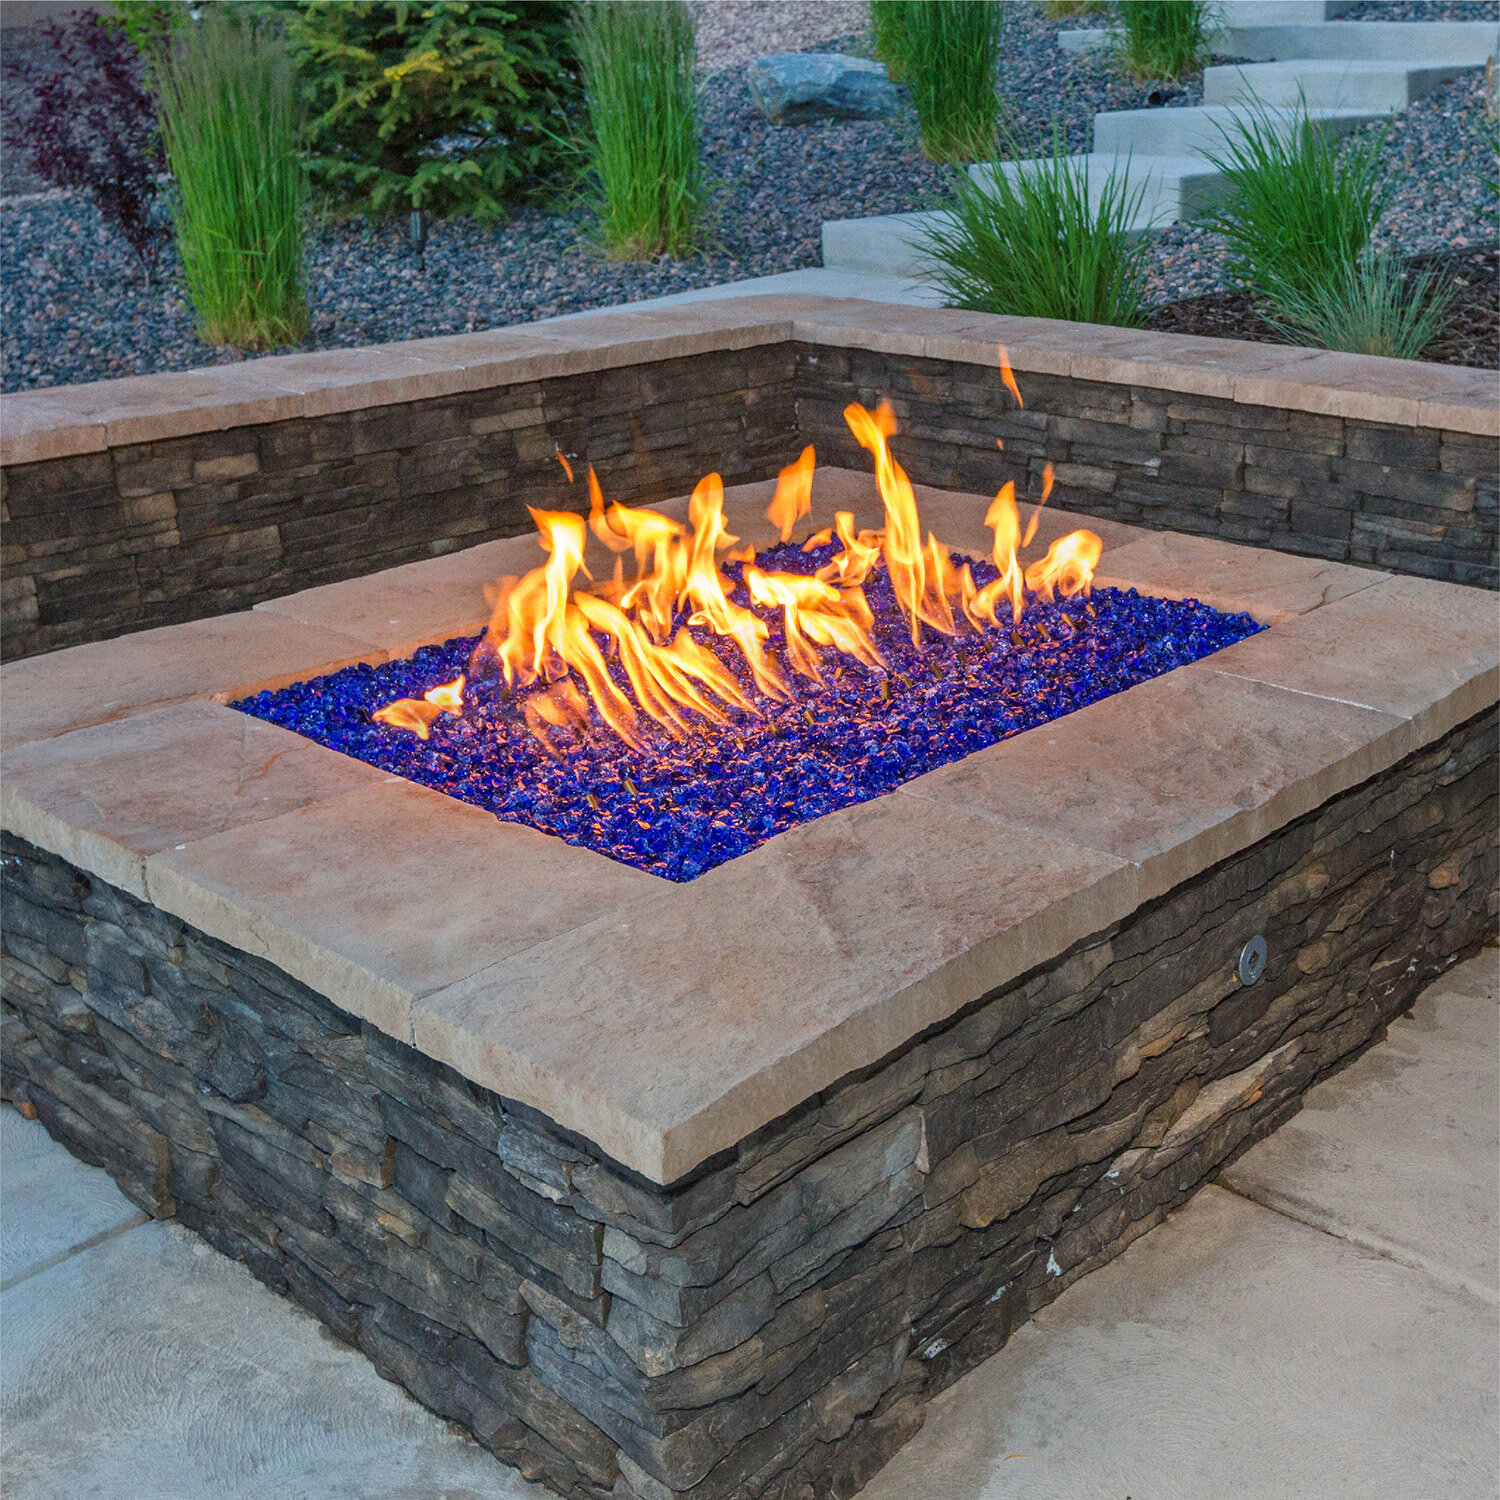 10 Best Outdoor Fire Pit Ideas to DIY or Buy: Fire Pit With Lava Rocks
